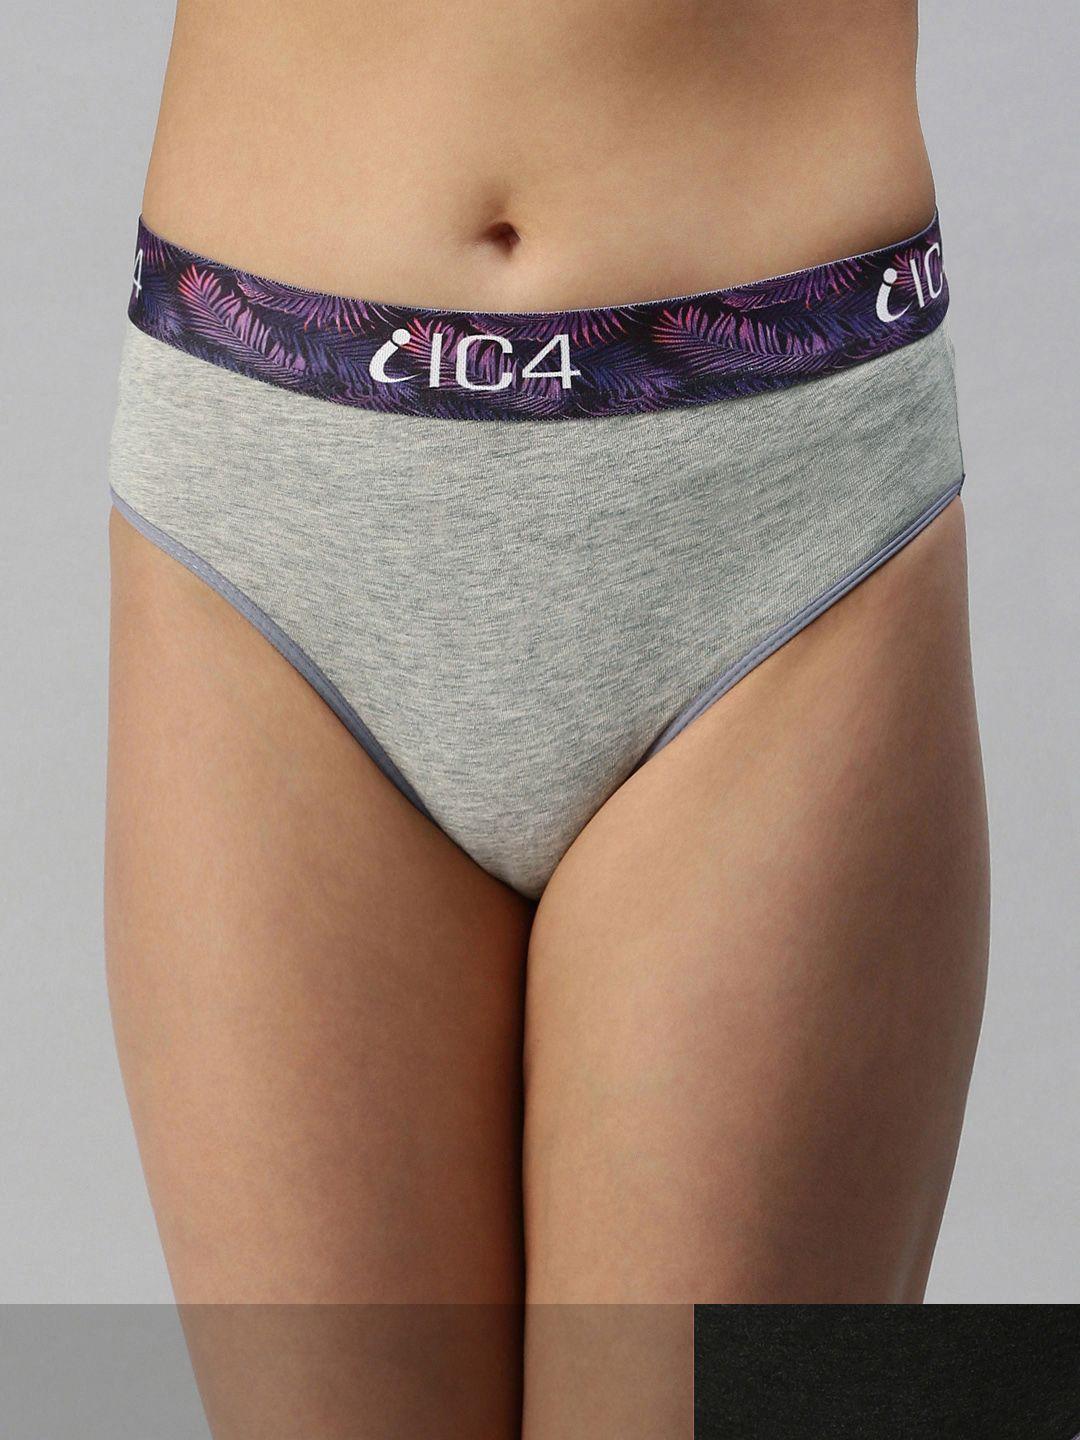 ic4 women charcoal & grey melange solid pack of 2 hipster briefs- 0c-g-1011p2